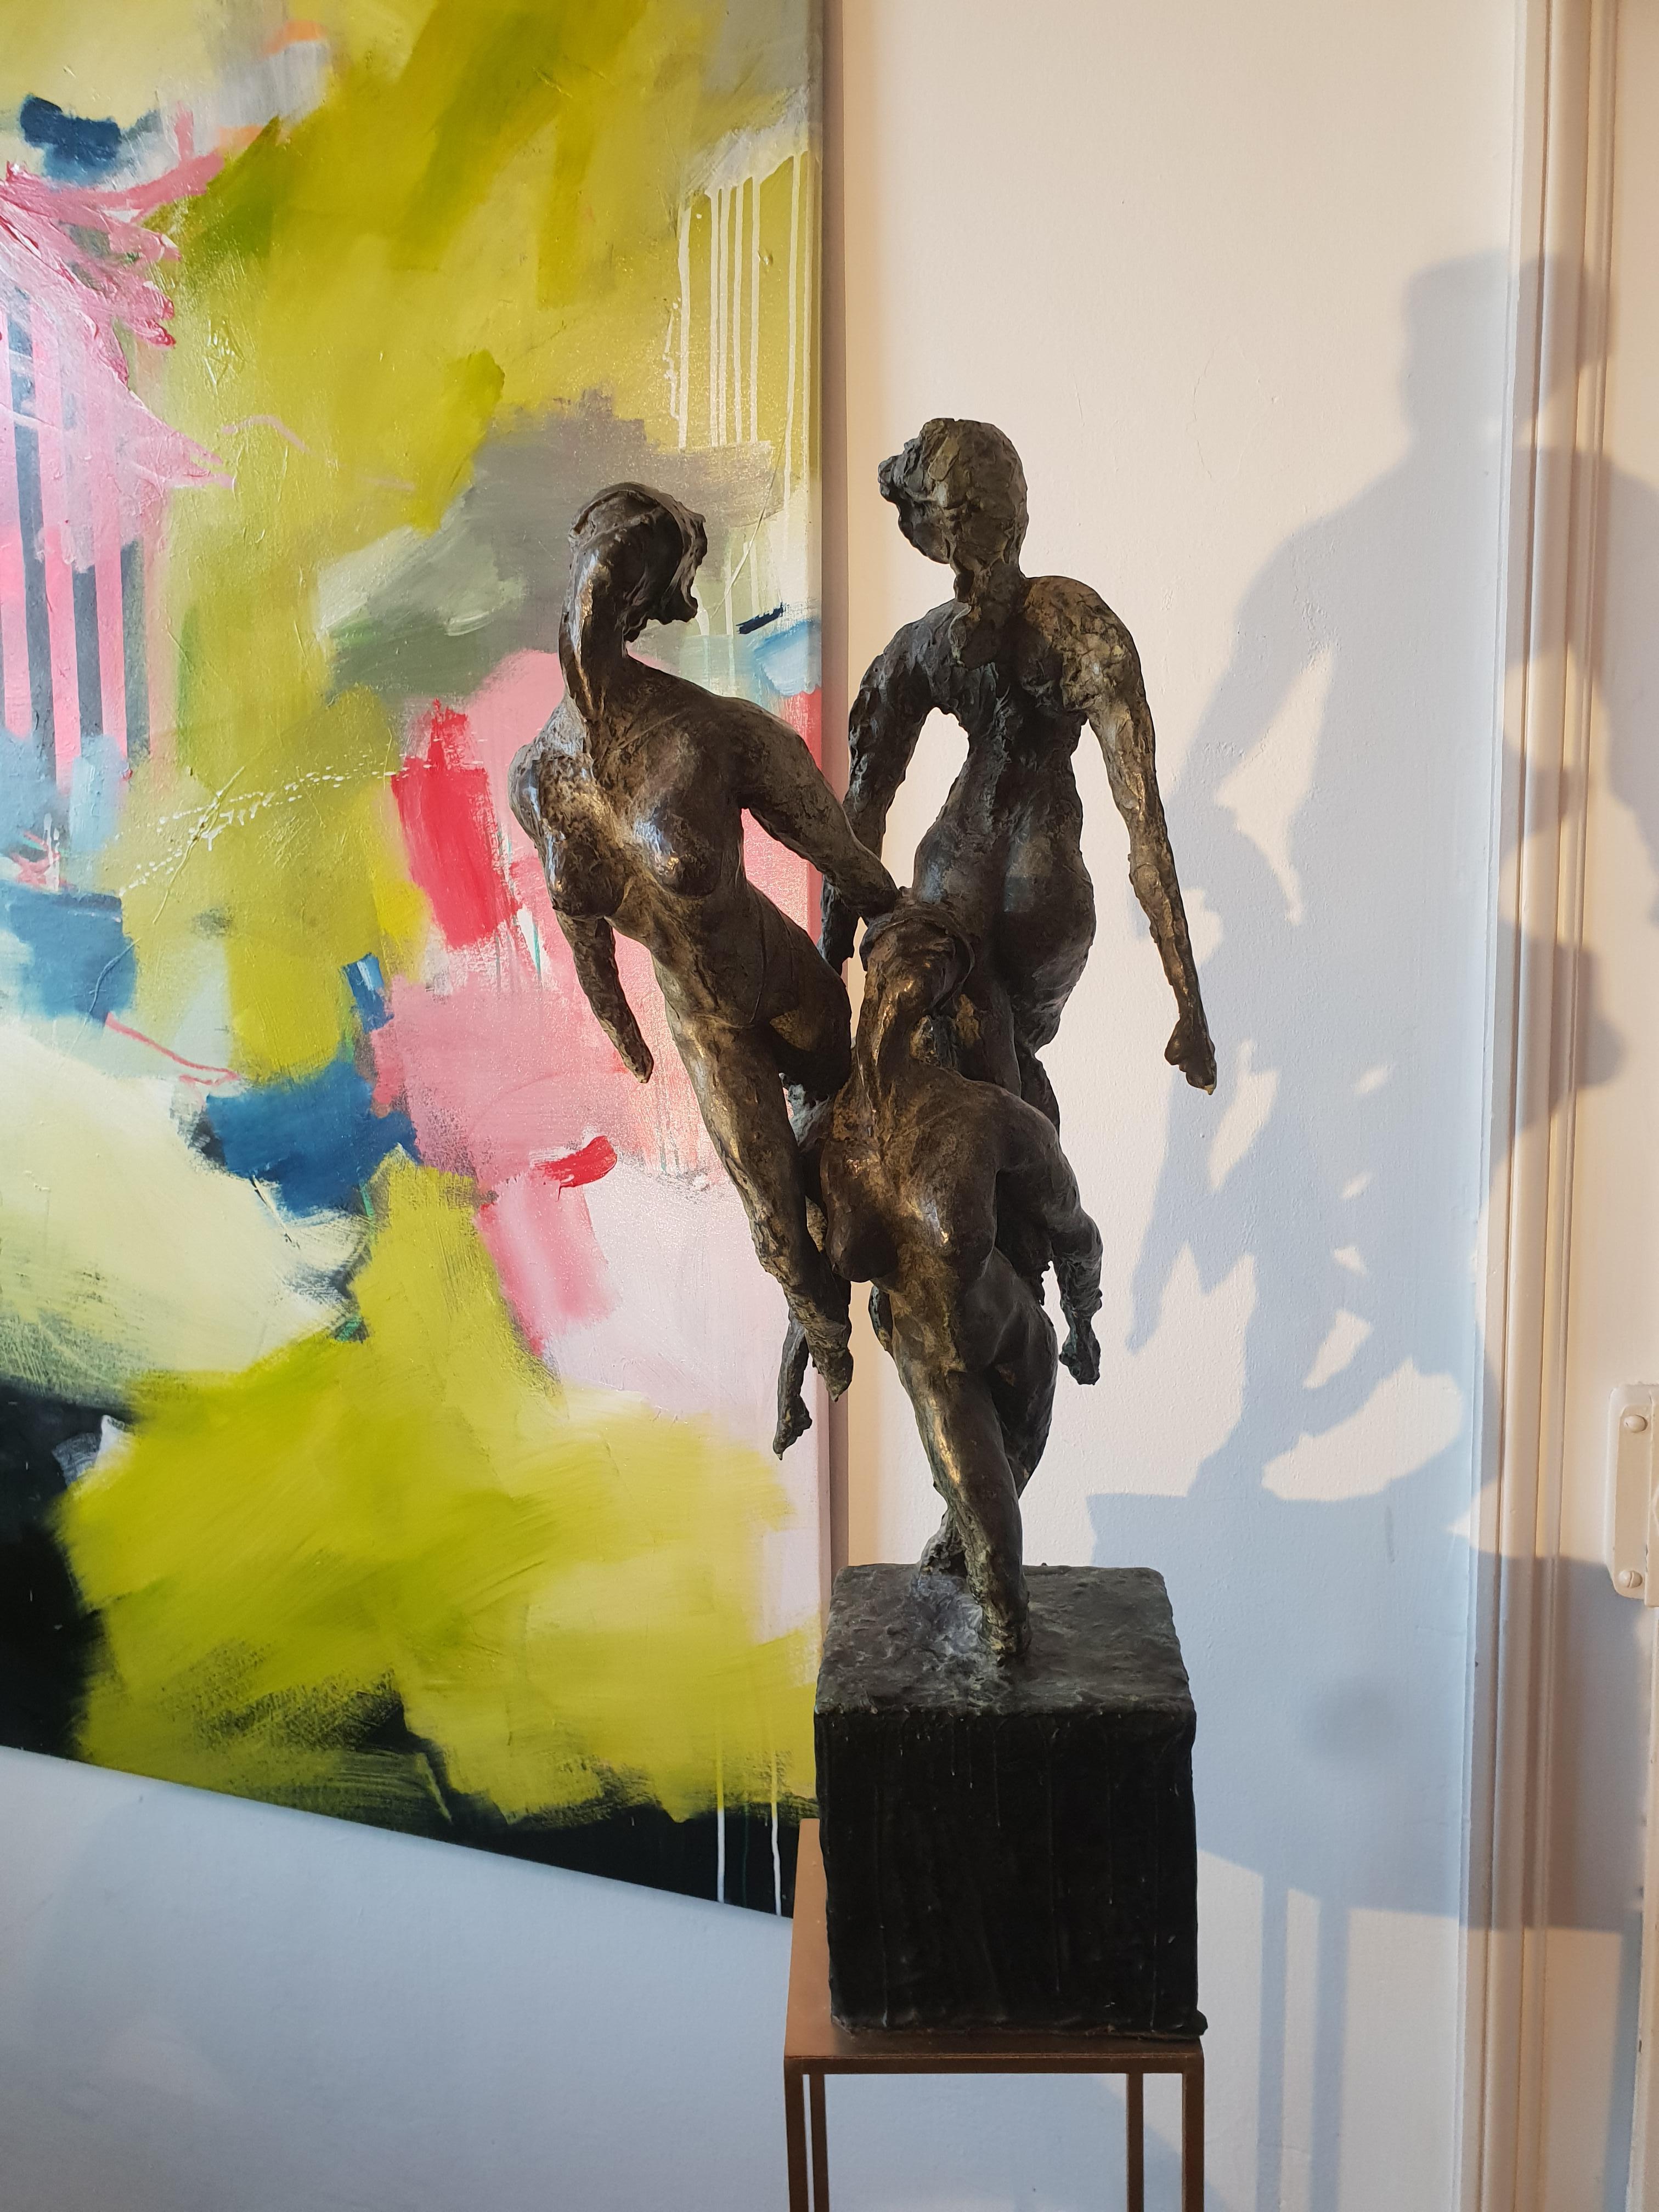 Nymphs by Emmanuel Okoro sculpture of nude female nymphs, black / green patina For Sale 1